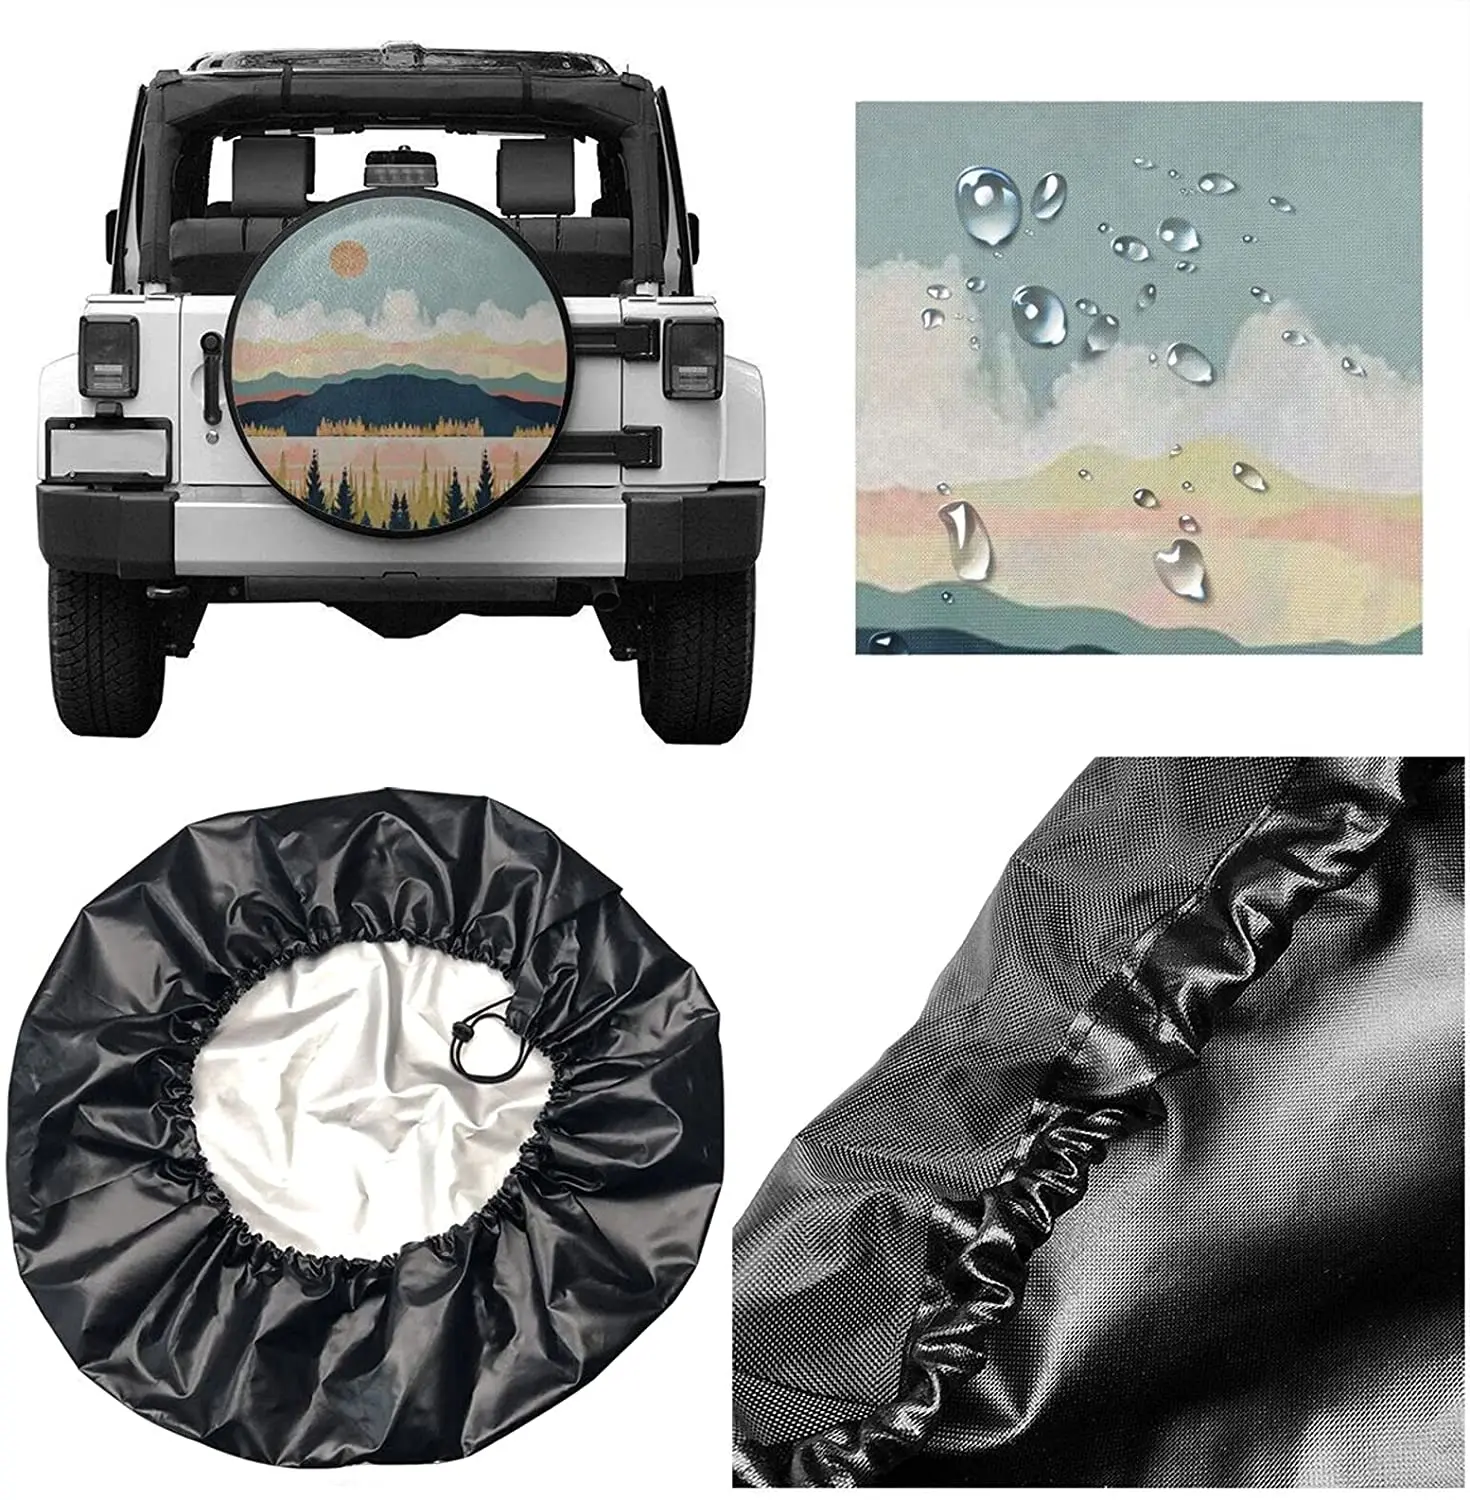 Cozipink Rivers Mountains Natural Scenery Spare Tire Cover Lake Landscape  Wheel Protectors Weatherproof Universal Car Covers AliExpress